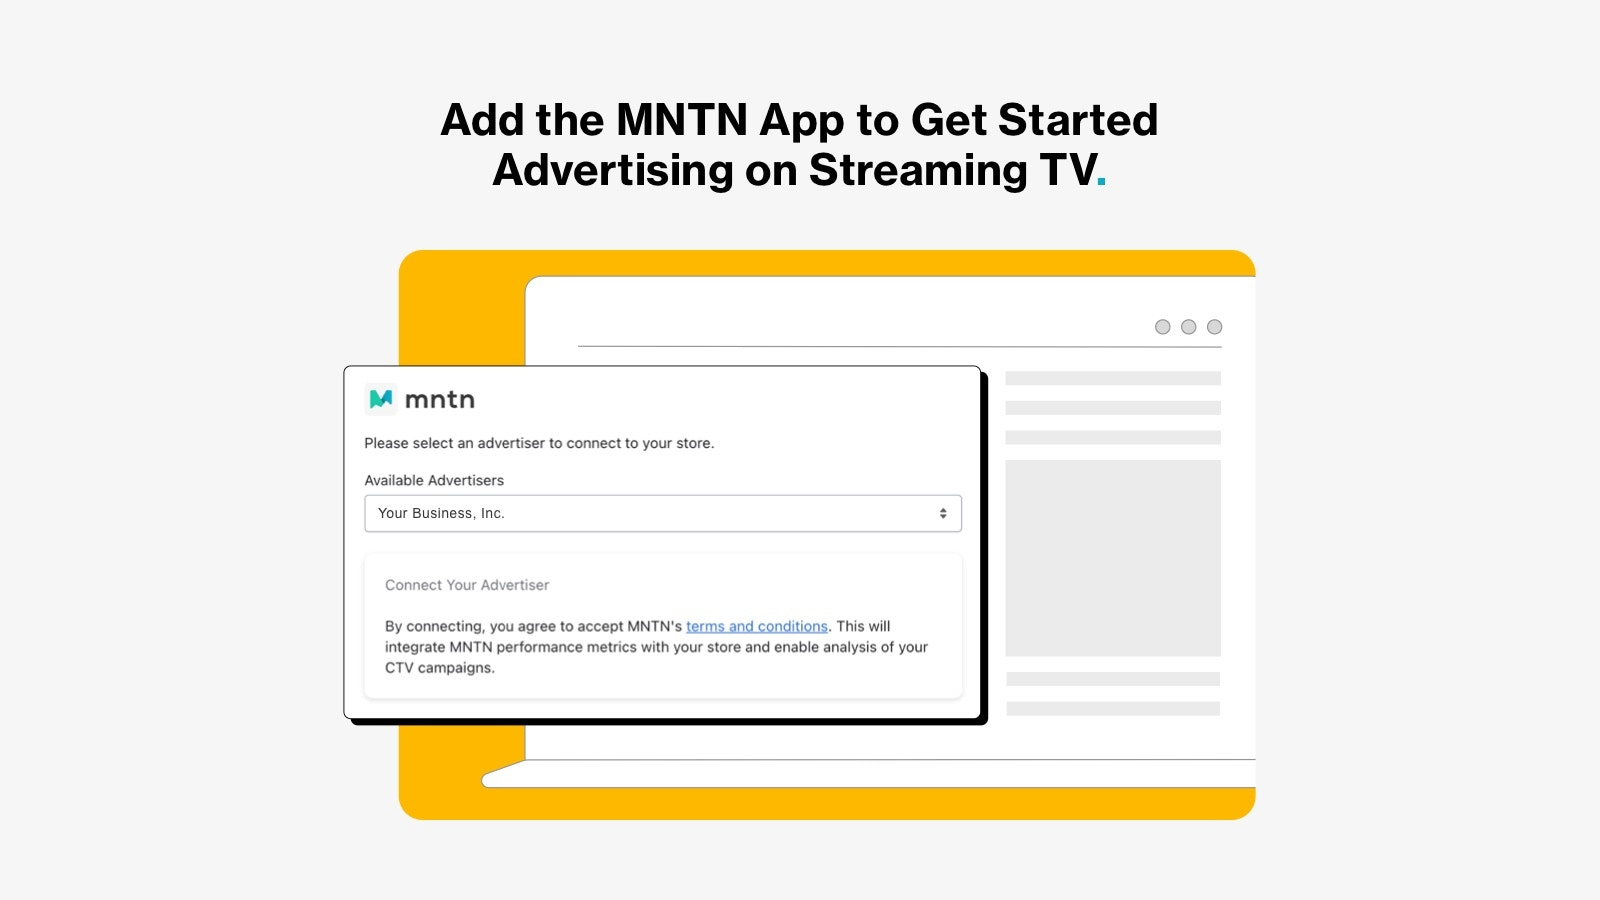 Add MNTN app to get started advertising on streaming TV.